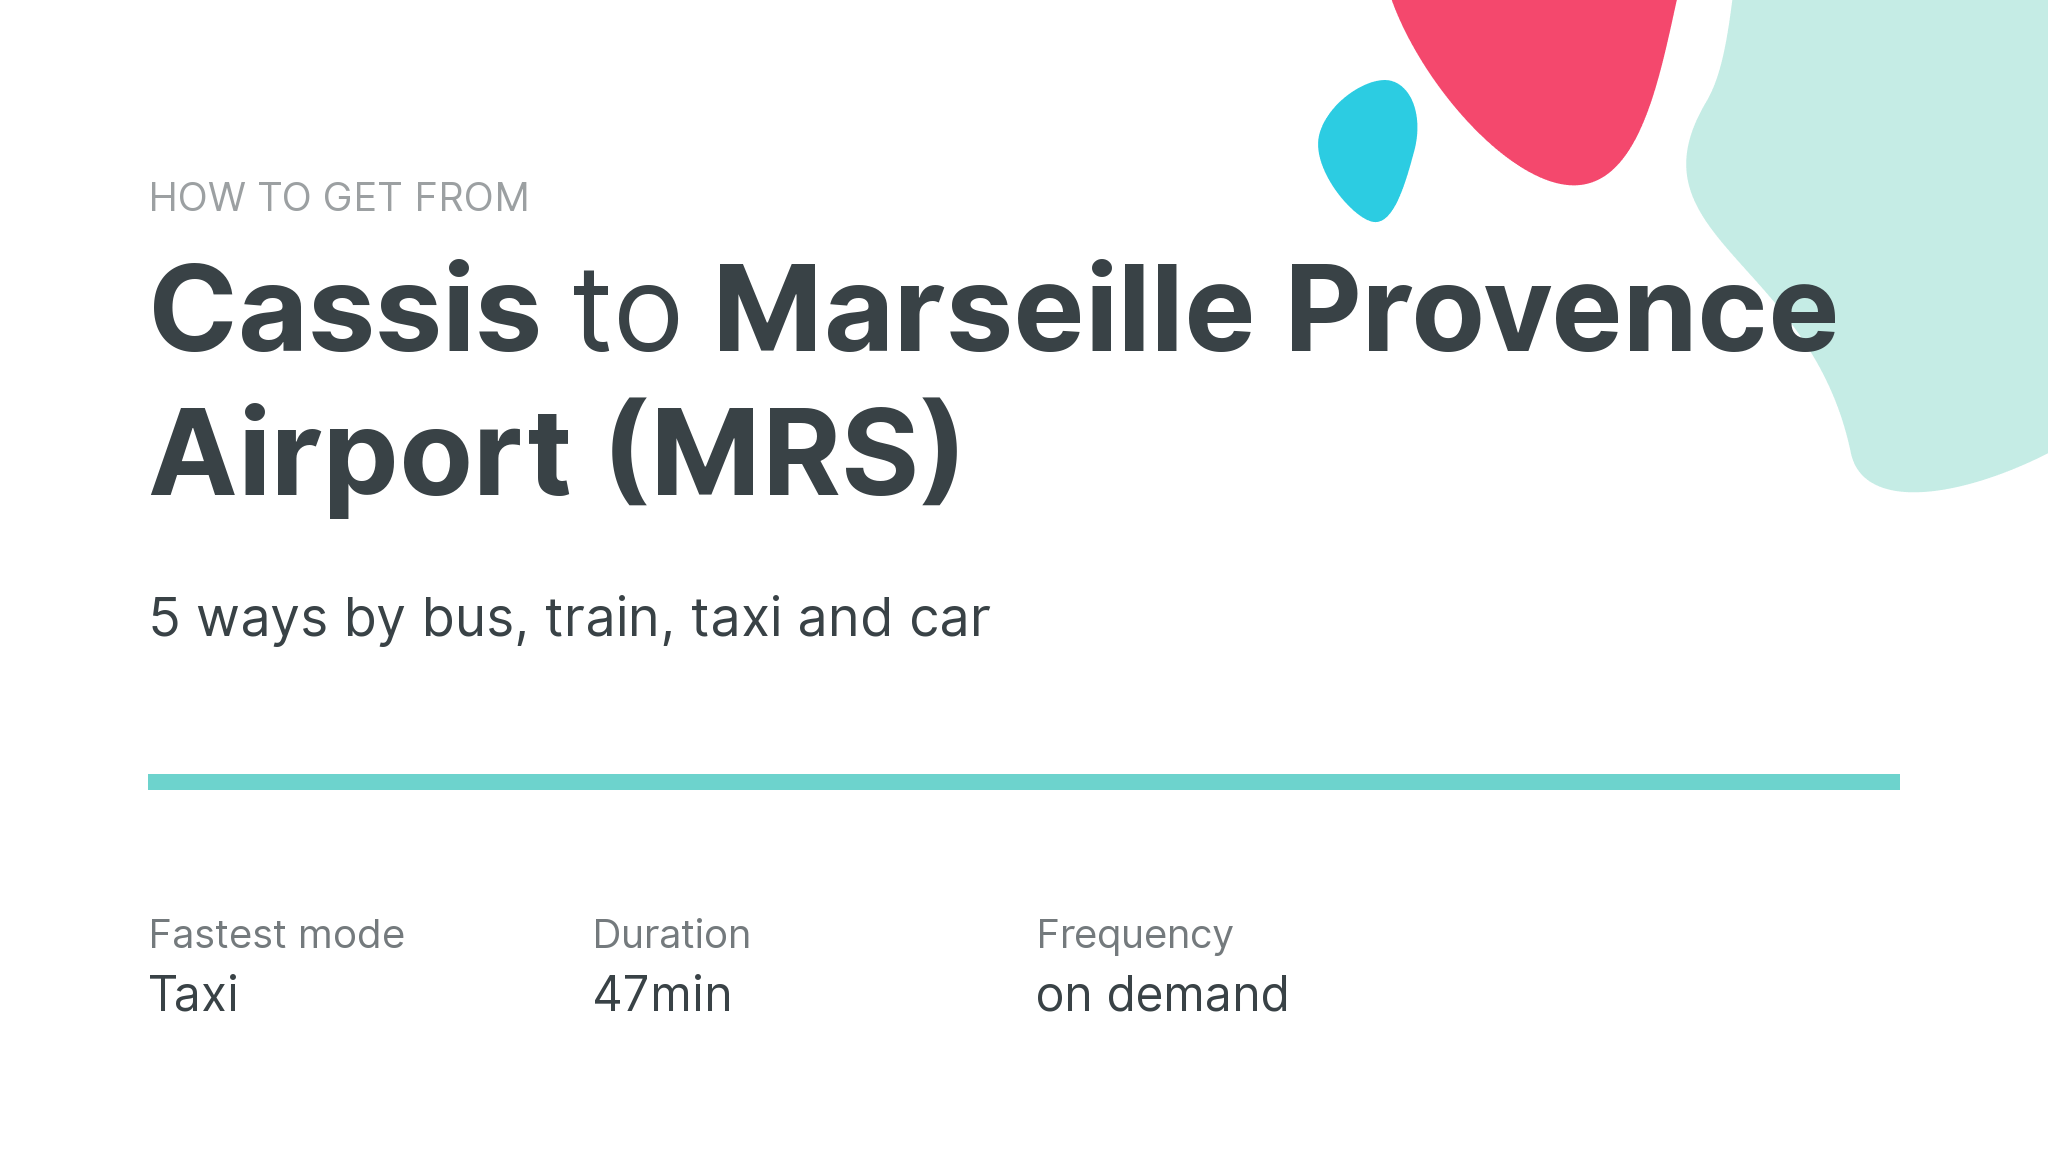 How do I get from Cassis to Marseille Provence Airport (MRS)